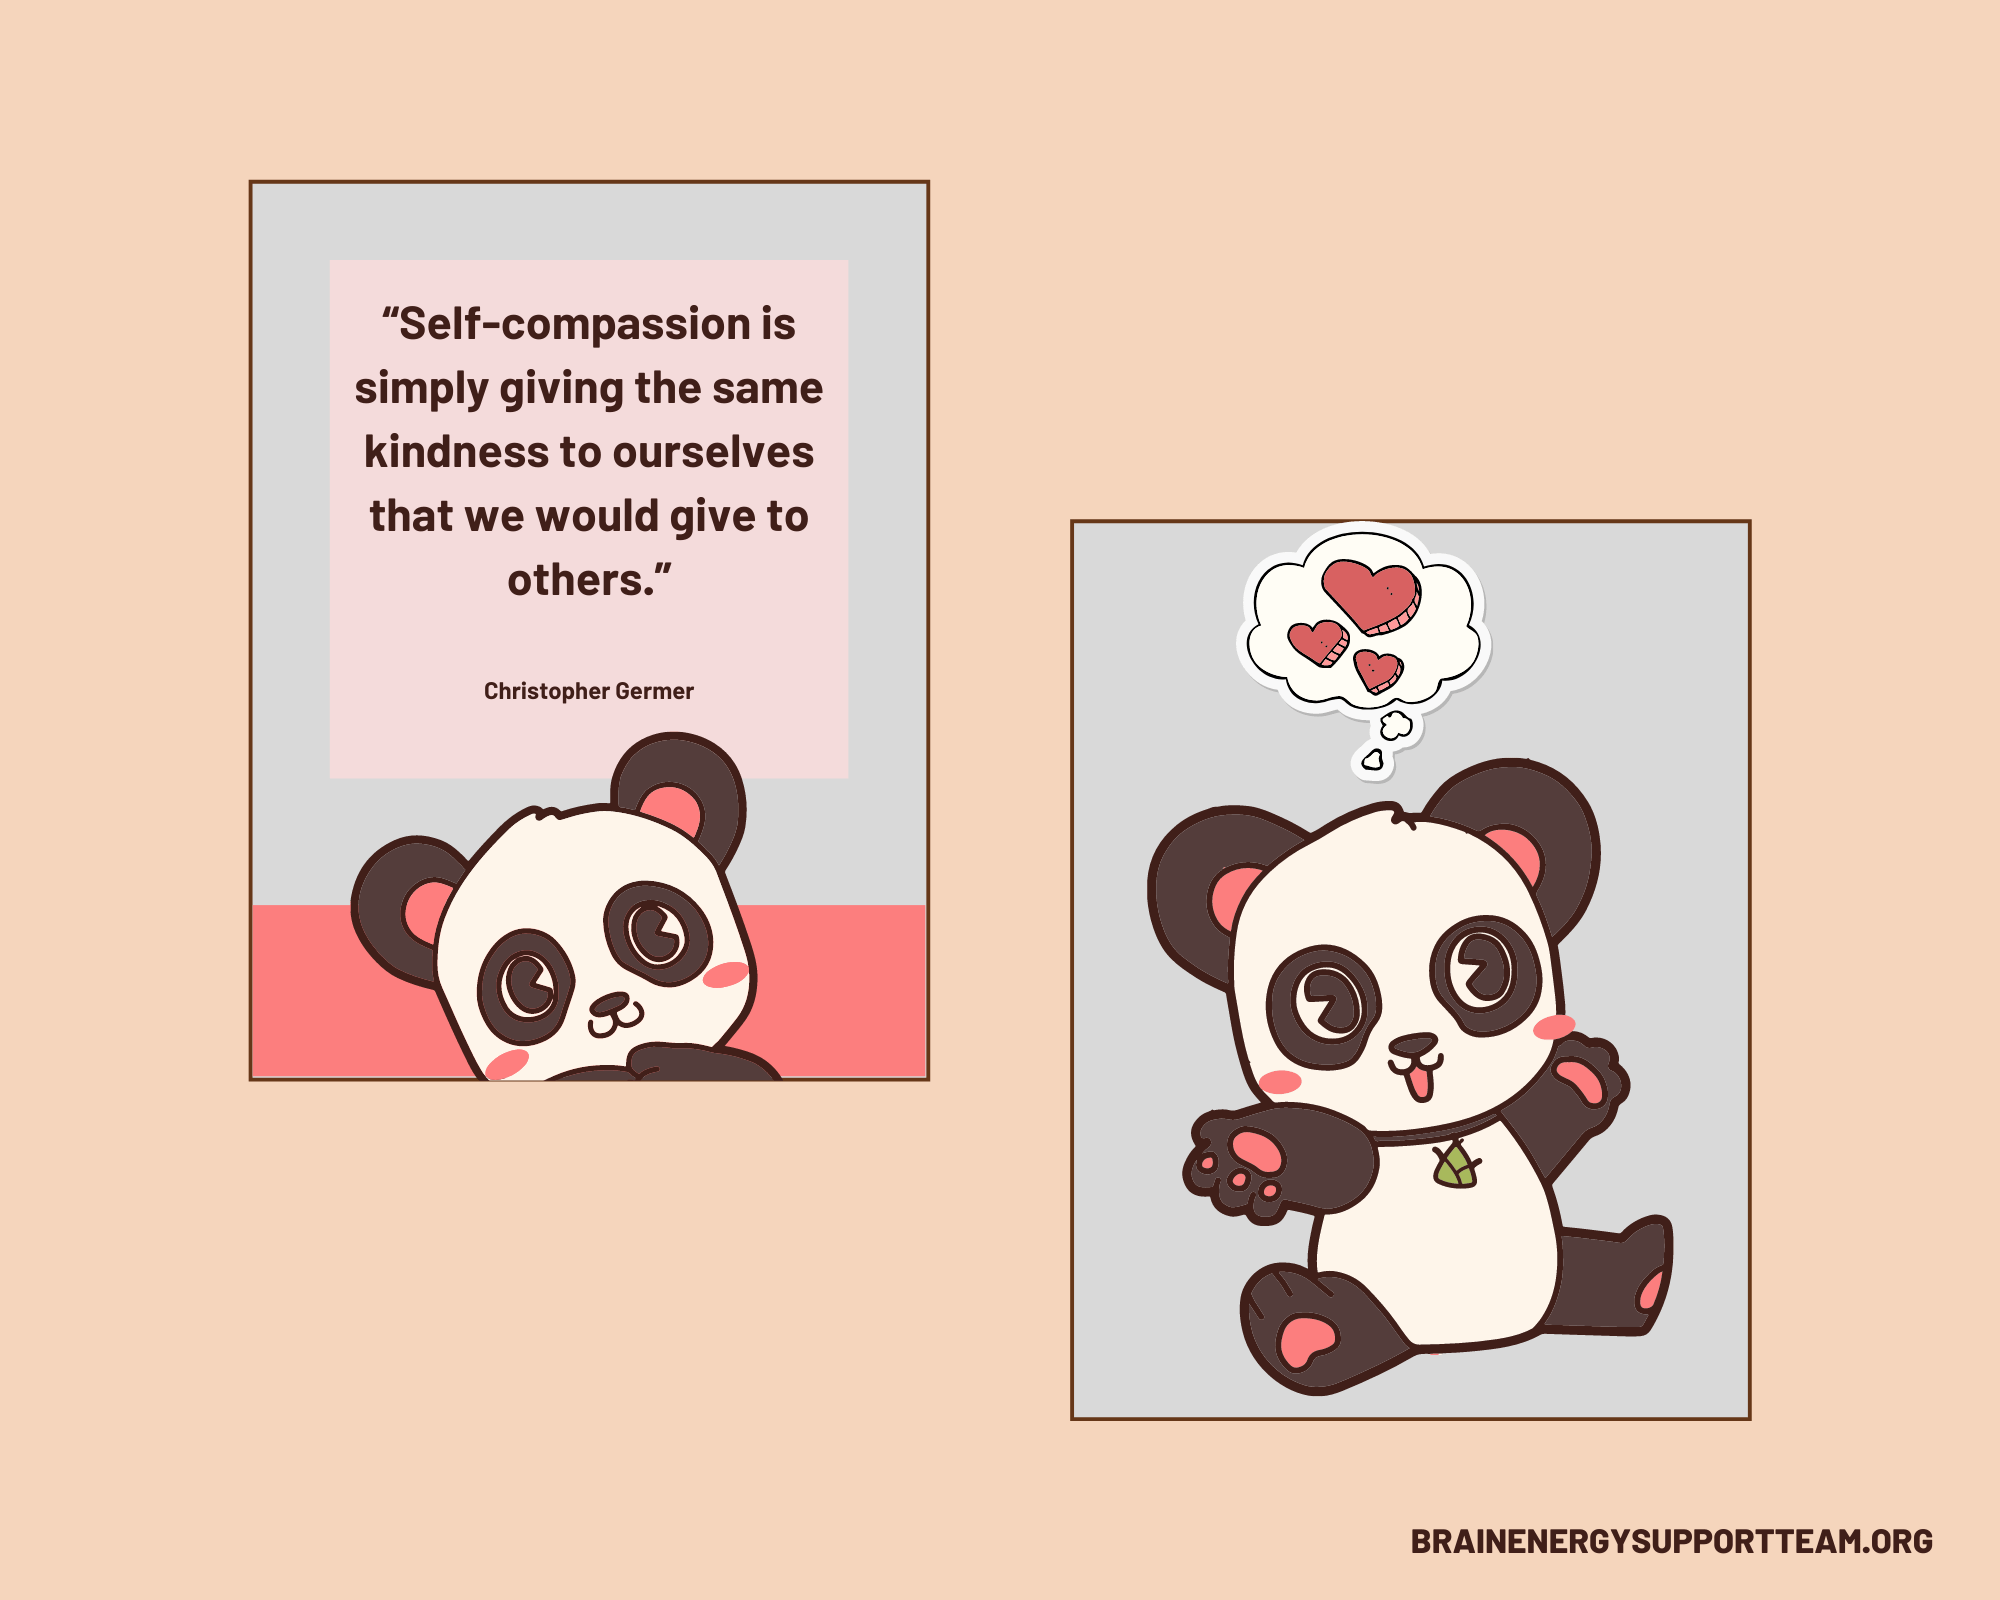 A cute simple drawing of a panda looking and listening in the first panel, in the second panel, the panda has its arms outstretched to hug and is thinking of love. Text reads: “Self-compassion is simply giving the same kindness to ourselves that we would give to others.” Christopher Germer